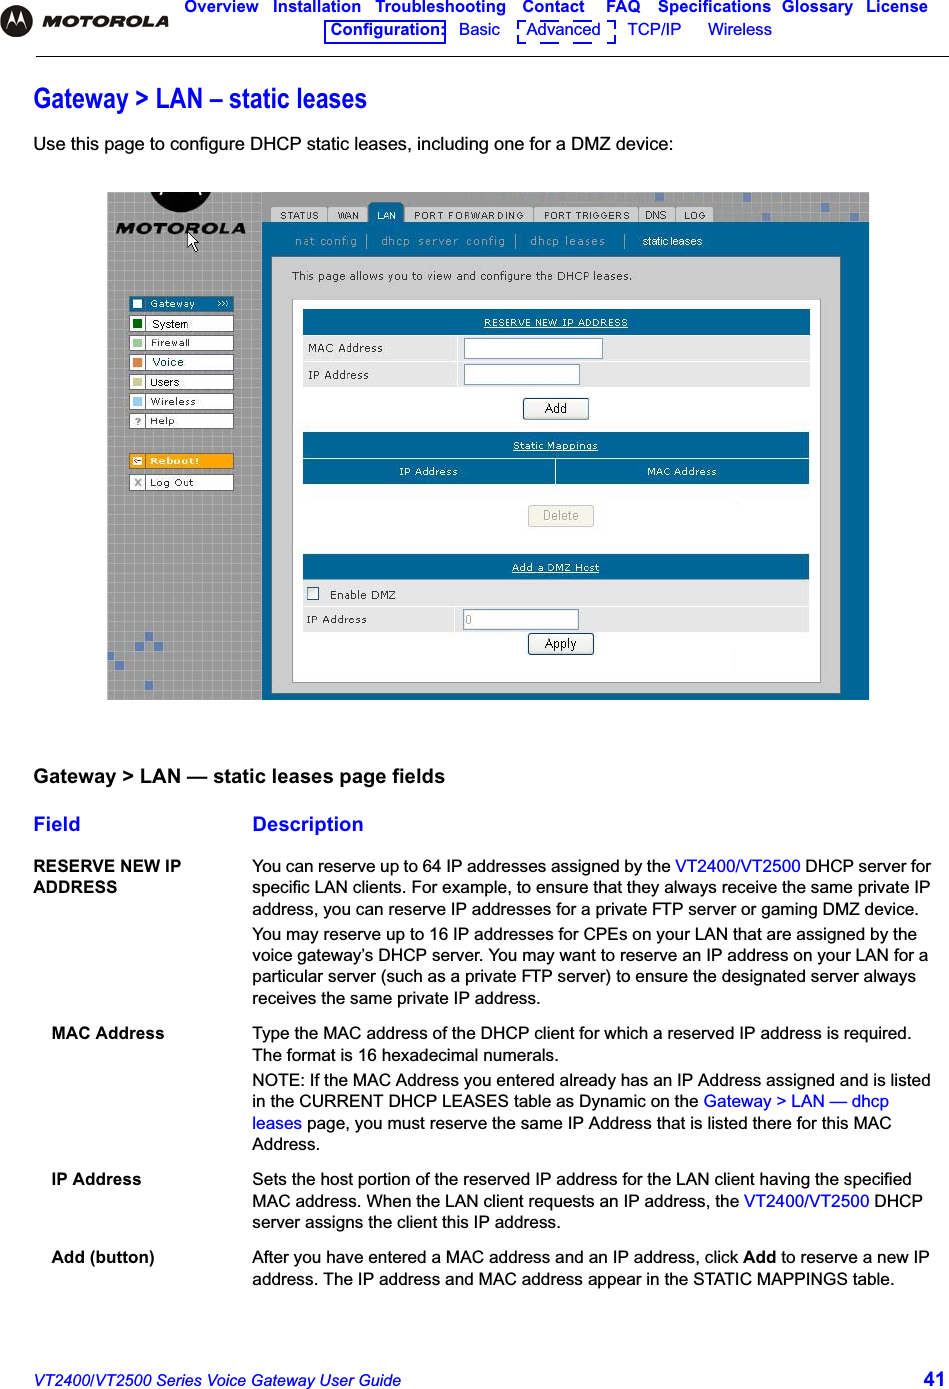 VT2400/VT2500 Series Voice Gateway User Guide 41Overview Installation Troubleshooting Contact FAQ Specifications Glossary LicenseConfiguration:   Basic      Advanced      TCP/IP      Wireless Gateway &gt; LAN – static leasesUse this page to configure DHCP static leases, including one for a DMZ device:Gateway &gt; LAN — static leases page fieldsField DescriptionRESERVE NEW IP ADDRESSYou can reserve up to 64 IP addresses assigned by the VT2400/VT2500 DHCP server for specific LAN clients. For example, to ensure that they always receive the same private IP address, you can reserve IP addresses for a private FTP server or gaming DMZ device.You may reserve up to 16 IP addresses for CPEs on your LAN that are assigned by the voice gateway’s DHCP server. You may want to reserve an IP address on your LAN for a particular server (such as a private FTP server) to ensure the designated server always receives the same private IP address.MAC Address Type the MAC address of the DHCP client for which a reserved IP address is required. The format is 16 hexadecimal numerals. NOTE: If the MAC Address you entered already has an IP Address assigned and is listed in the CURRENT DHCP LEASES table as Dynamic on the Gateway &gt; LAN — dhcp leases page, you must reserve the same IP Address that is listed there for this MAC Address. IP Address Sets the host portion of the reserved IP address for the LAN client having the specified MAC address. When the LAN client requests an IP address, the VT2400/VT2500 DHCP server assigns the client this IP address.Add (button) After you have entered a MAC address and an IP address, click Add to reserve a new IP address. The IP address and MAC address appear in the STATIC MAPPINGS table.